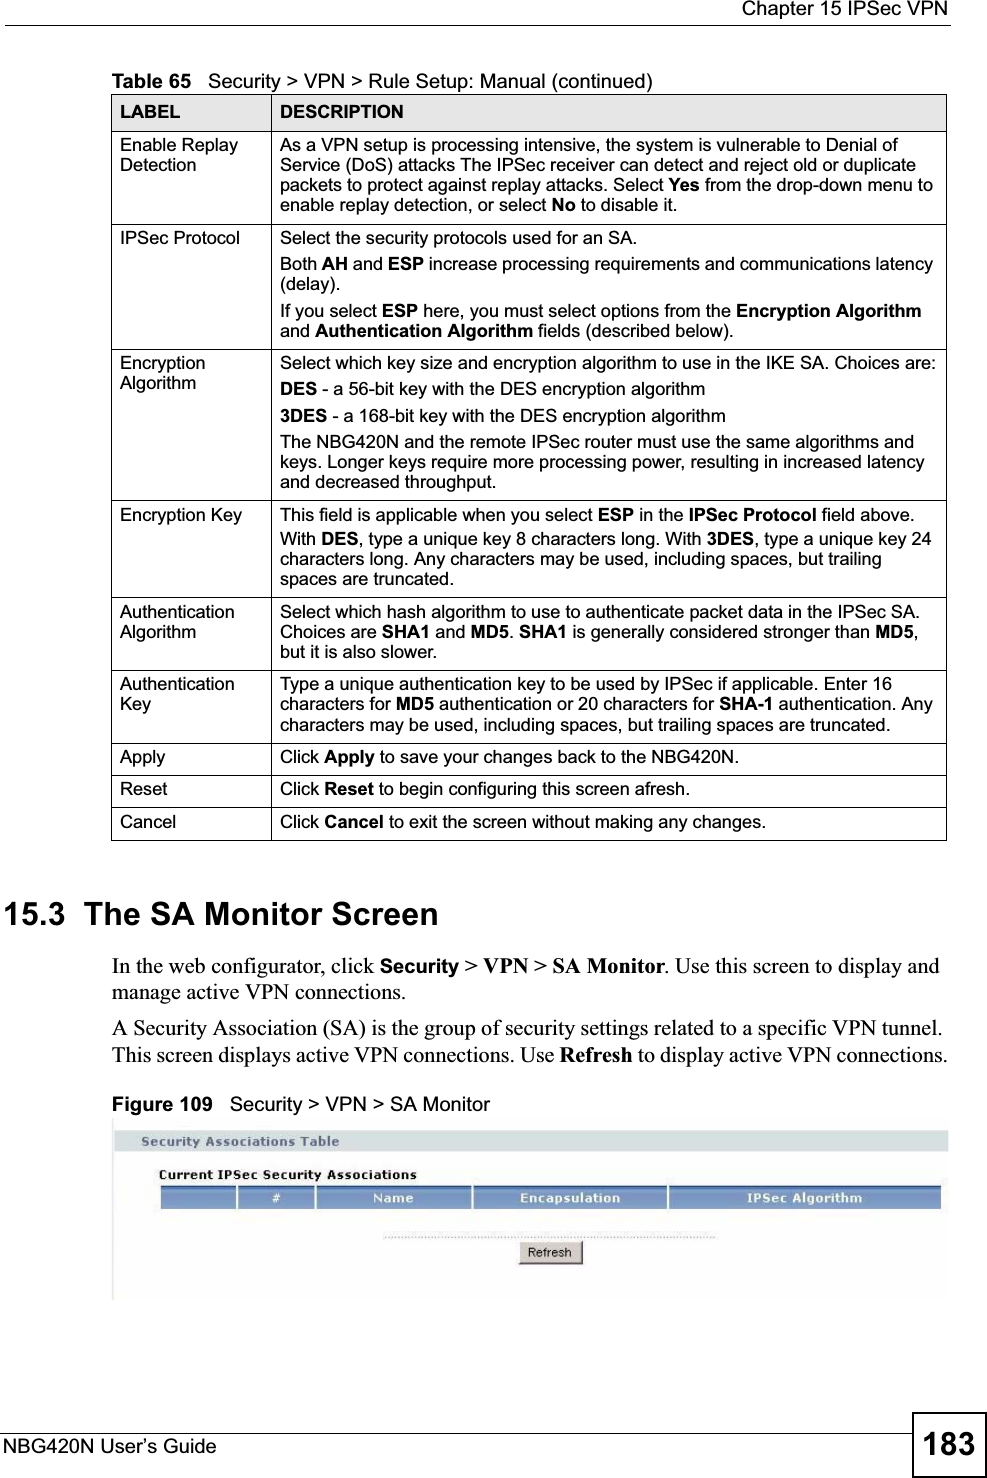  Chapter 15 IPSec VPNNBG420N User’s Guide 18315.3  The SA Monitor ScreenIn the web configurator, click Security &gt; VPN &gt; SA Monitor. Use this screen to display and manage active VPN connections.A Security Association (SA) is the group of security settings related to a specific VPN tunnel. This screen displays active VPN connections. Use Refresh to display active VPN connections.Figure 109   Security &gt; VPN &gt; SA MonitorEnable Replay DetectionAs a VPN setup is processing intensive, the system is vulnerable to Denial of Service (DoS) attacks The IPSec receiver can detect and reject old or duplicate packets to protect against replay attacks. Select Yes from the drop-down menu to enable replay detection, or select No to disable it. IPSec Protocol Select the security protocols used for an SA. Both AH and ESP increase processing requirements and communications latency (delay). If you select ESP here, you must select options from the Encryption Algorithmand Authentication Algorithm fields (described below).Encryption AlgorithmSelect which key size and encryption algorithm to use in the IKE SA. Choices are:DES - a 56-bit key with the DES encryption algorithm3DES - a 168-bit key with the DES encryption algorithmThe NBG420N and the remote IPSec router must use the same algorithms and keys. Longer keys require more processing power, resulting in increased latency and decreased throughput.Encryption Key  This field is applicable when you select ESP in the IPSec Protocol field above. With DES, type a unique key 8 characters long. With 3DES, type a unique key 24 characters long. Any characters may be used, including spaces, but trailing spaces are truncated.Authentication AlgorithmSelect which hash algorithm to use to authenticate packet data in the IPSec SA. Choices are SHA1 and MD5.SHA1 is generally considered stronger than MD5,but it is also slower.Authentication KeyType a unique authentication key to be used by IPSec if applicable. Enter 16 characters for MD5 authentication or 20 characters for SHA-1 authentication. Any characters may be used, including spaces, but trailing spaces are truncated.Apply Click Apply to save your changes back to the NBG420N.Reset Click Reset to begin configuring this screen afresh.Cancel Click Cancel to exit the screen without making any changes.Table 65   Security &gt; VPN &gt; Rule Setup: Manual (continued)LABEL DESCRIPTION